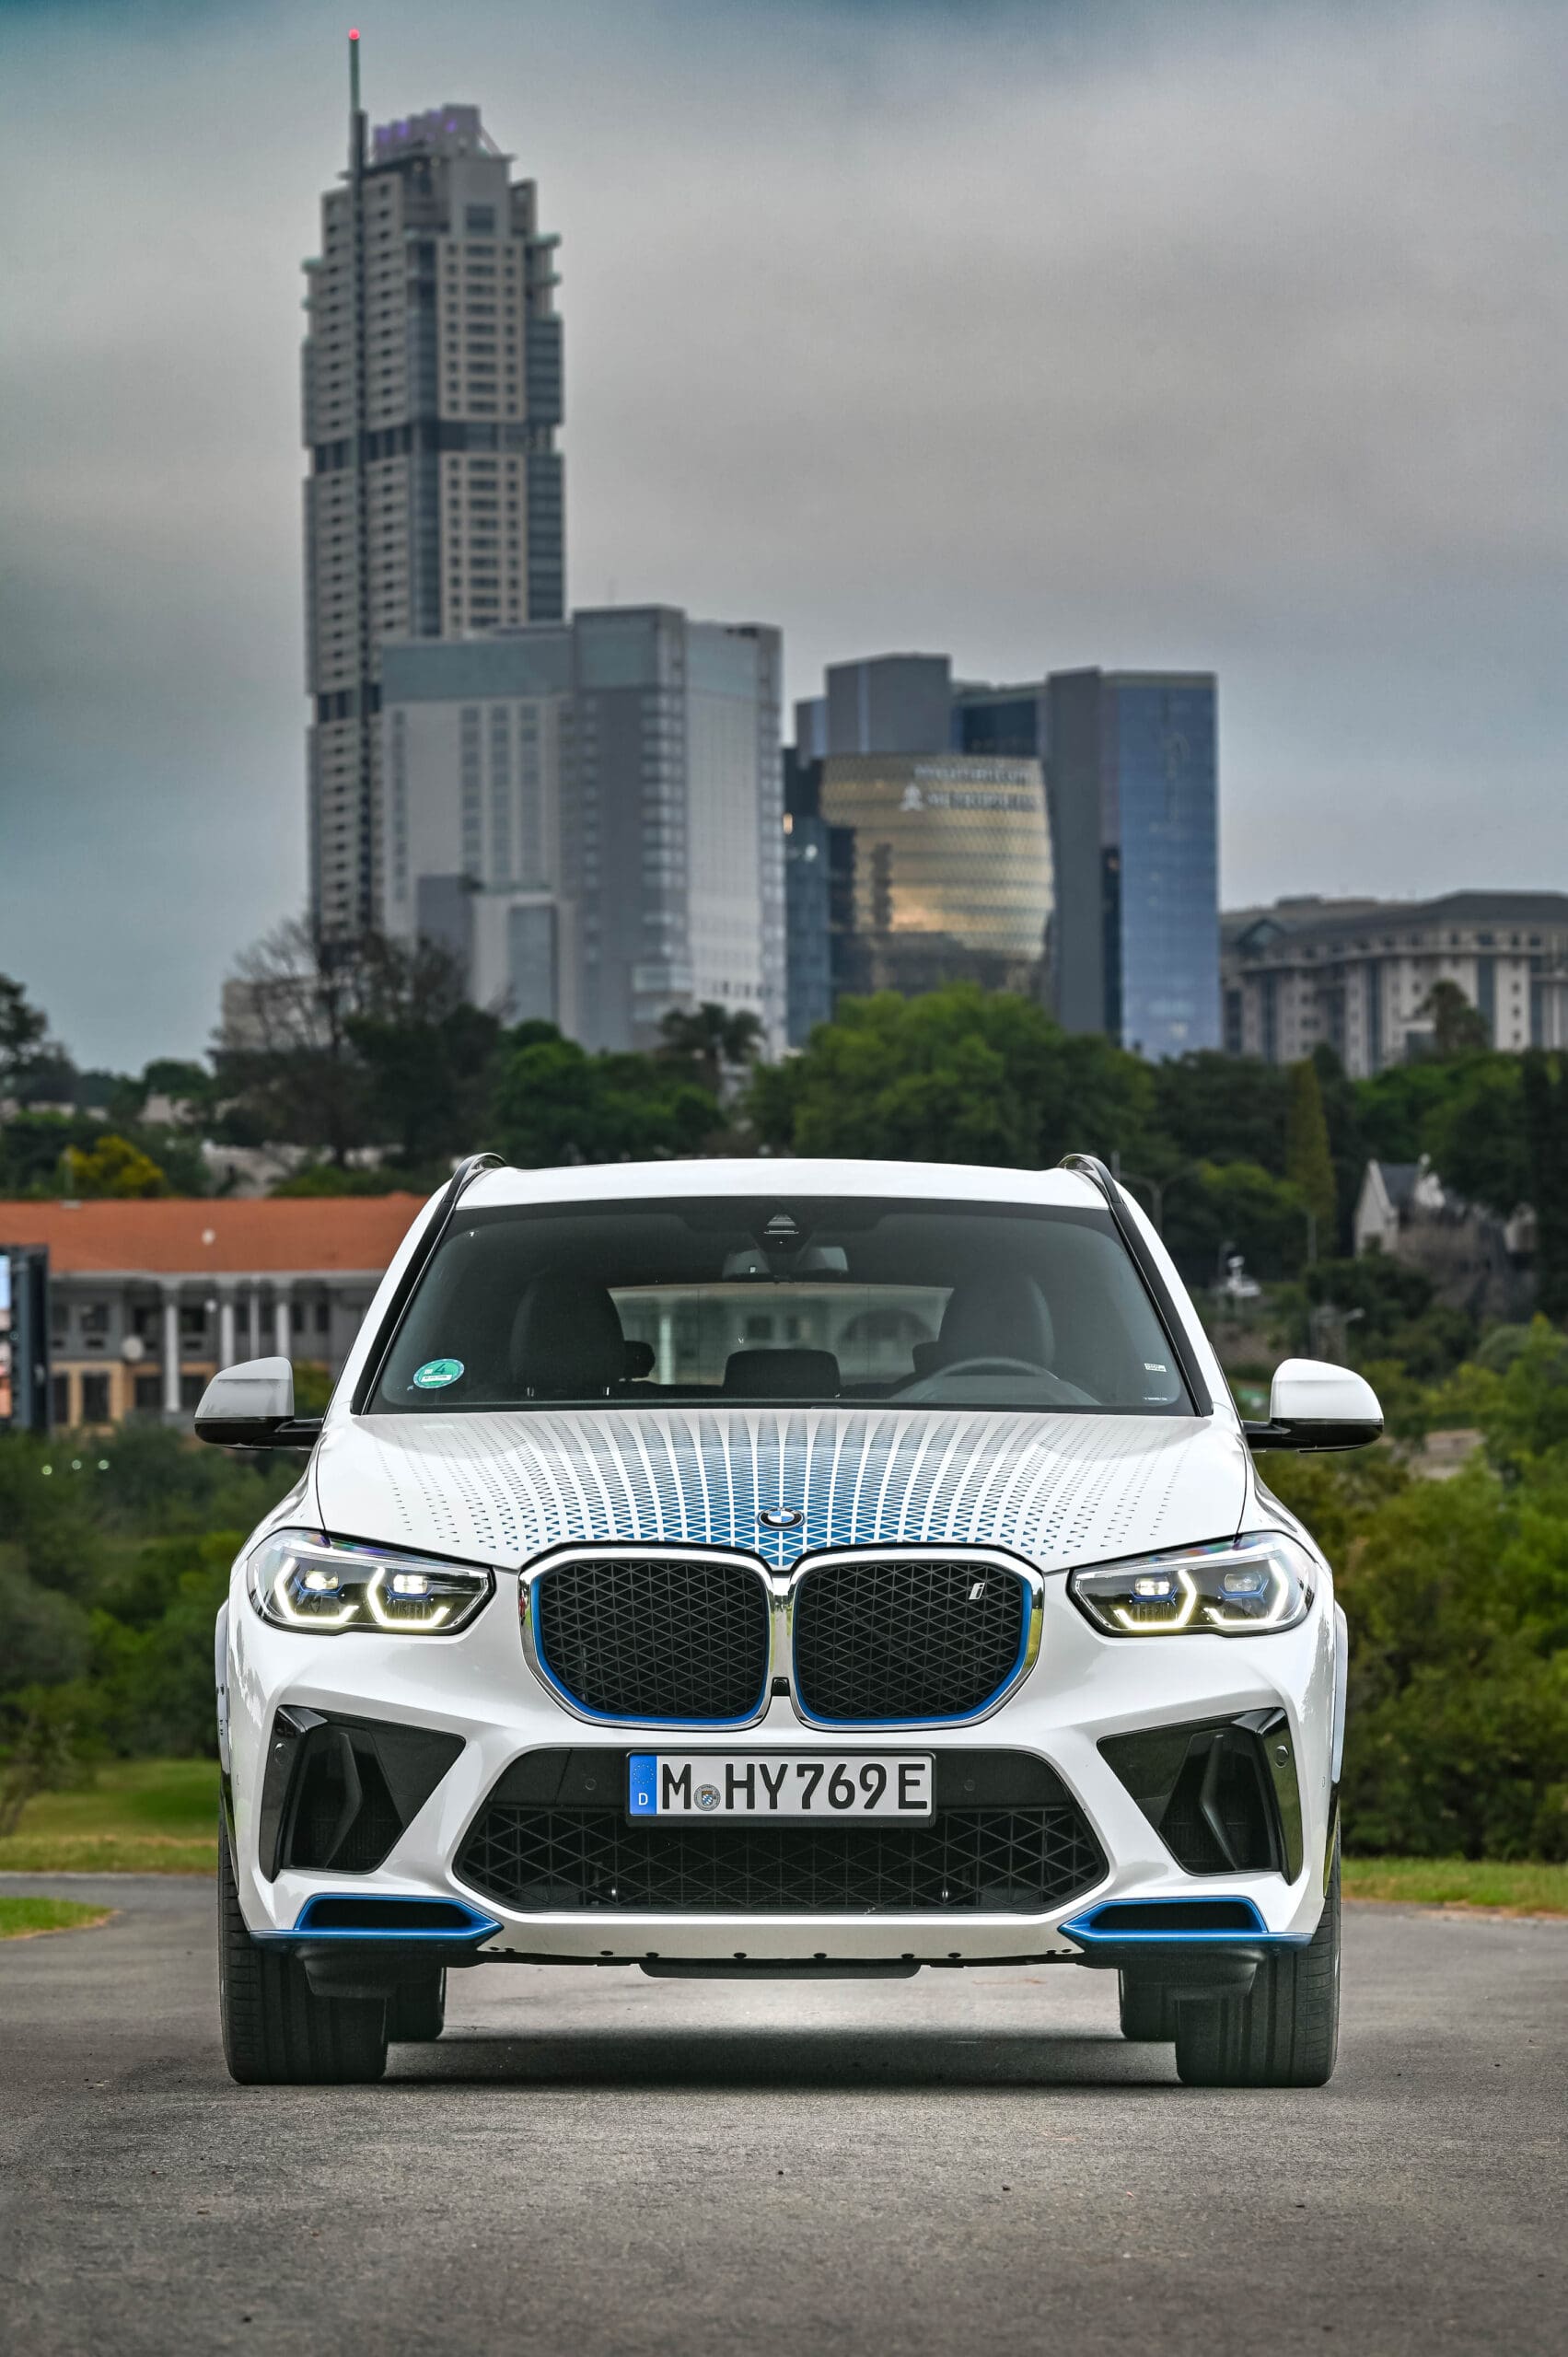 Anglo American Platinum, BMW Group South Africa and Sasol take next step in collaboration with pilot fleet of BMW iX5 Hydrogen fuel cell electric vehicles